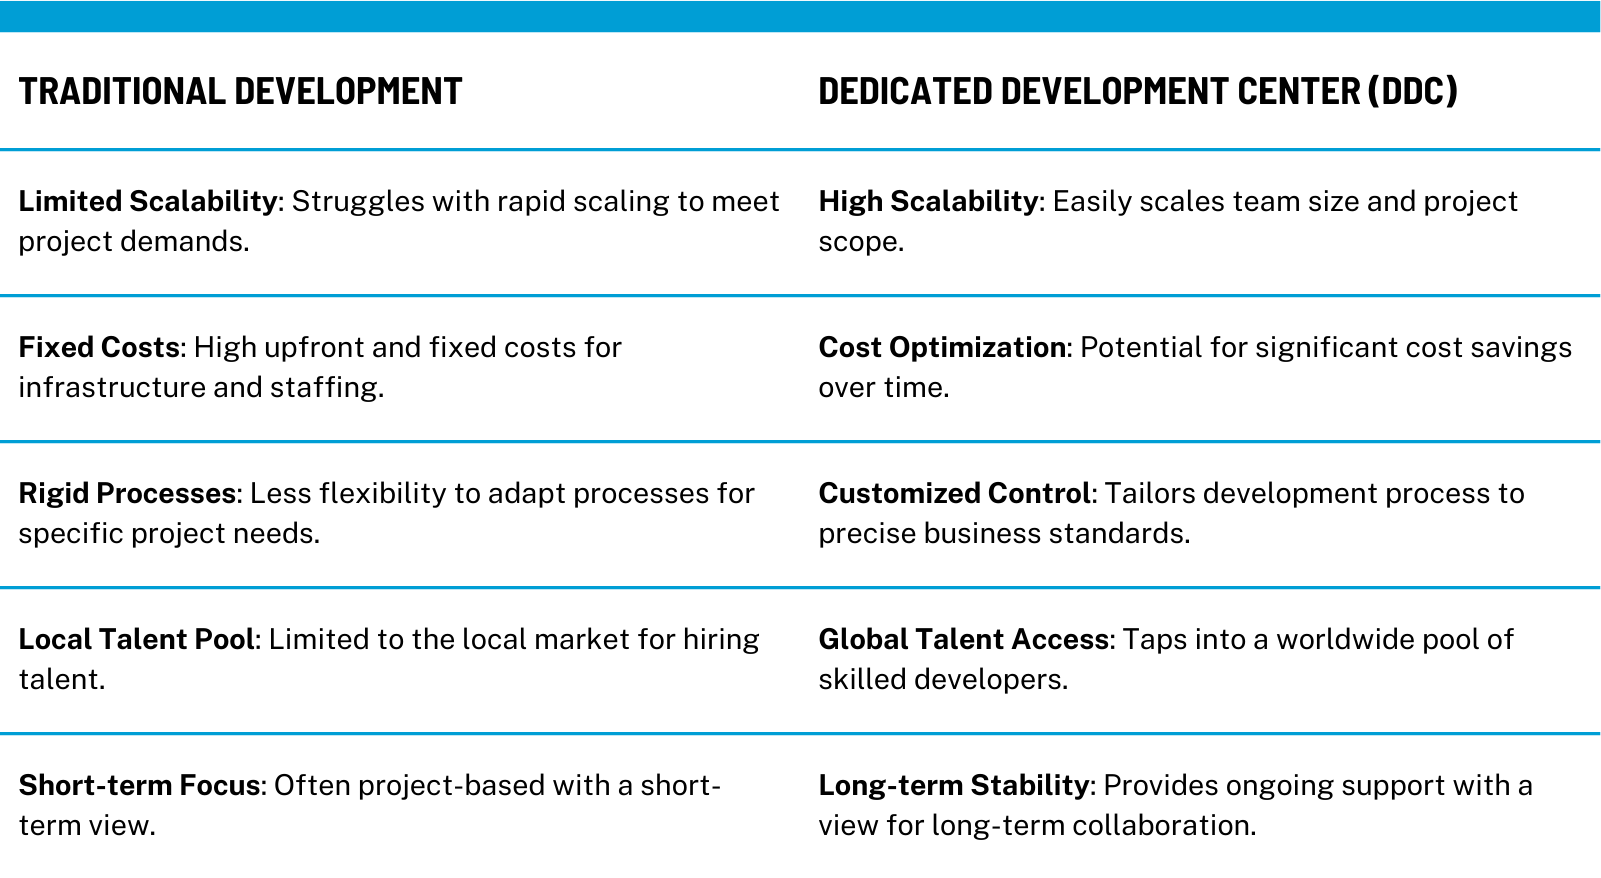 Comparison table contrasting Traditional Development with Dedicated Development Center (DDC), highlighting differences in scalability, costs, processes, talent access, and project focus for software development methodologies.